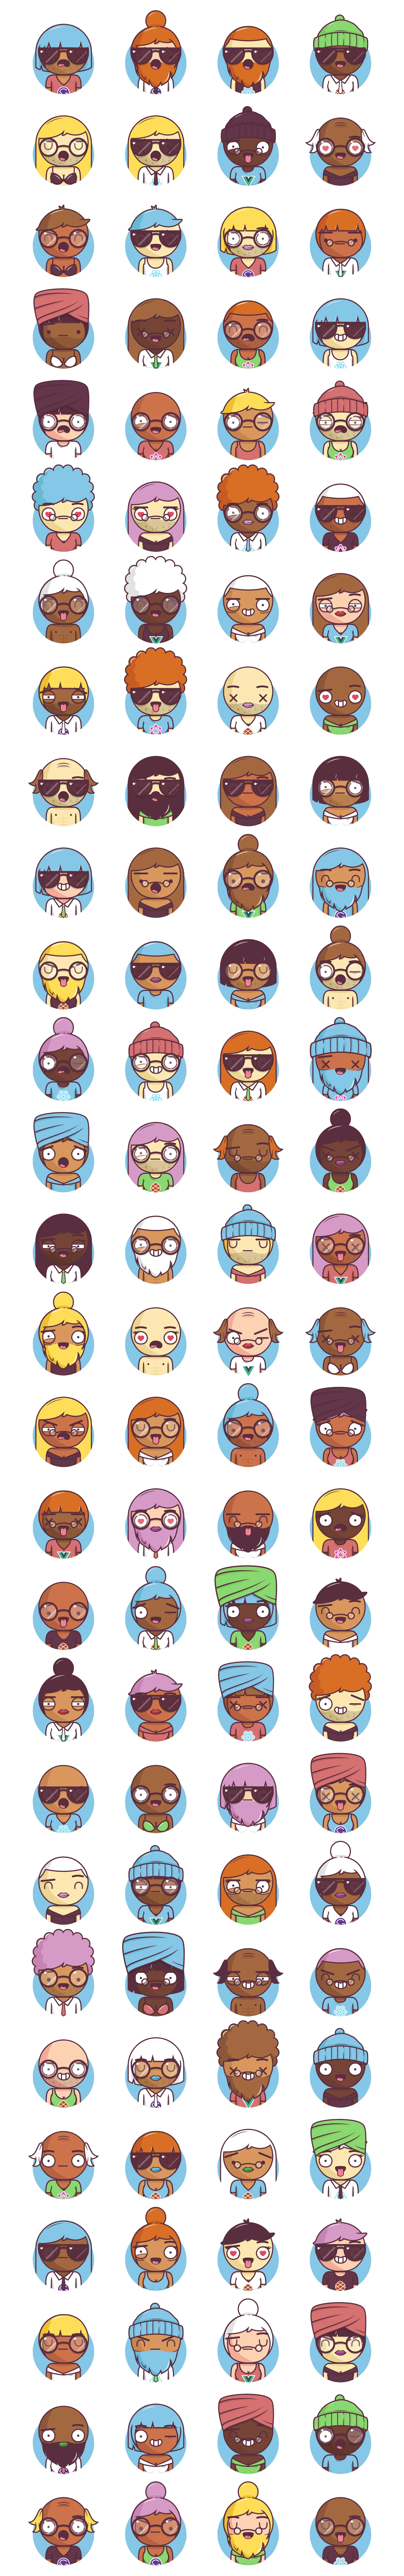 Big Heads Characters Free Illustrations - Easily generate characters for your projects. Combine expressions, clothing, hair styles and colors into billions of different unique characters. Embed them on your website, use them in your favourite design software, or import them from the React library!